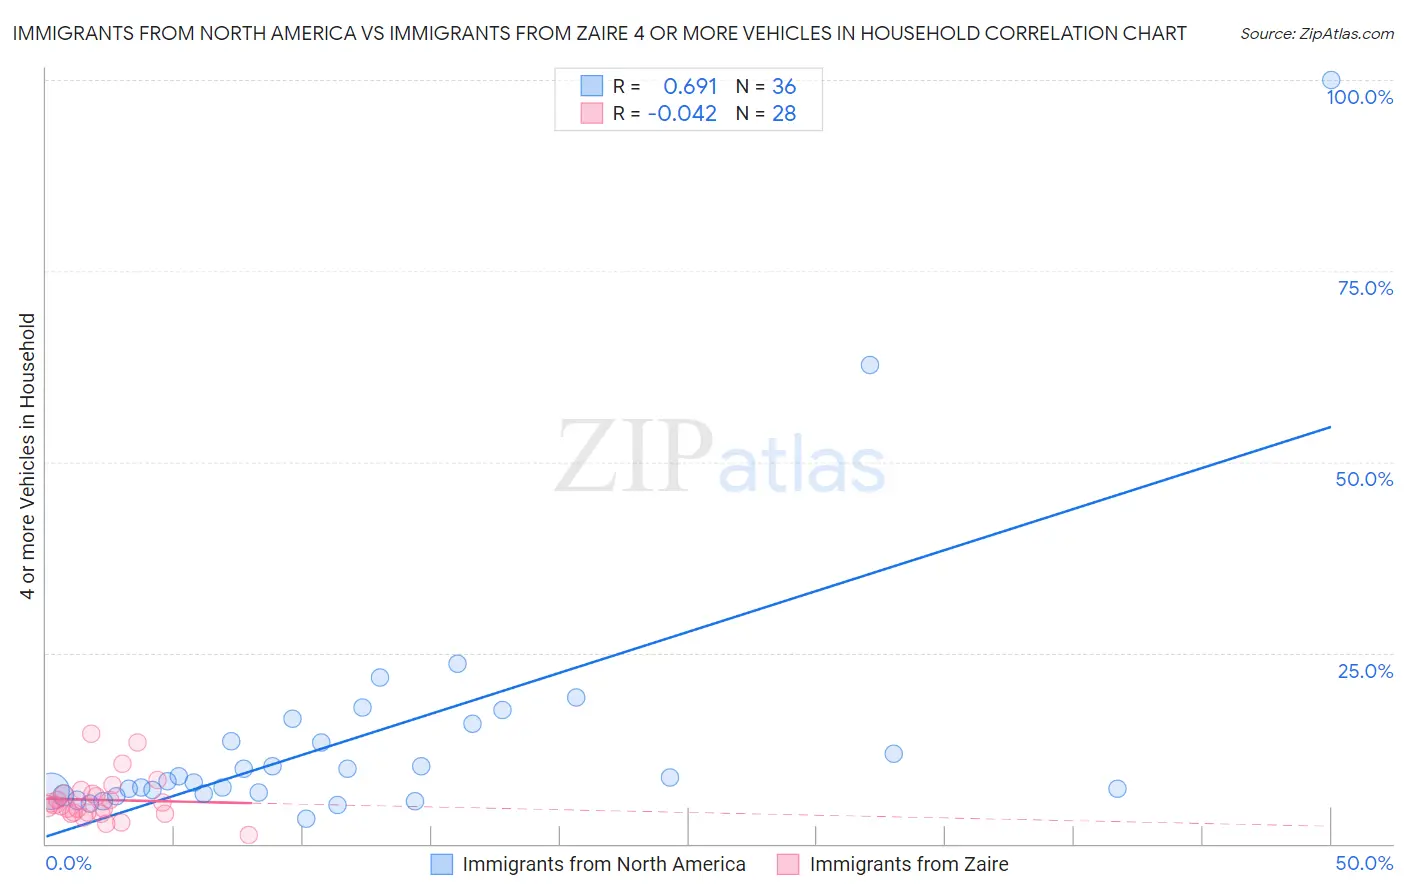 Immigrants from North America vs Immigrants from Zaire 4 or more Vehicles in Household